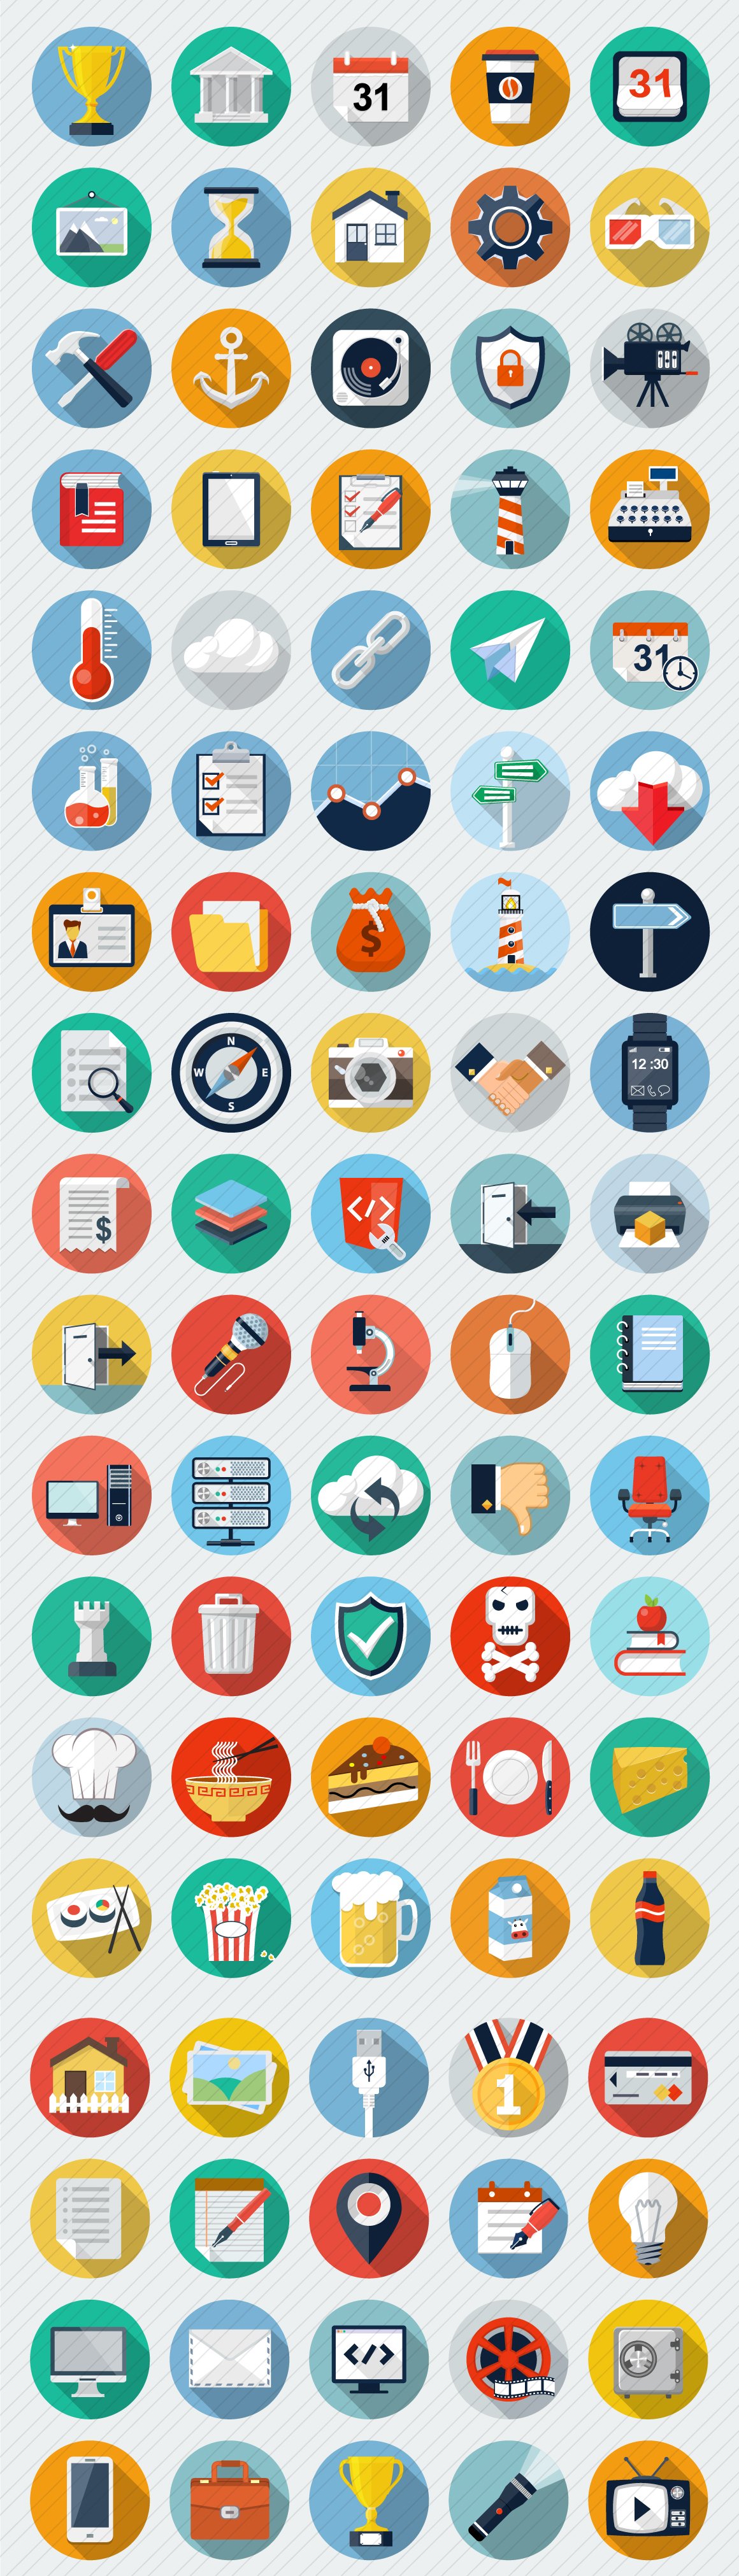 280 Flat Web icons. preview image.